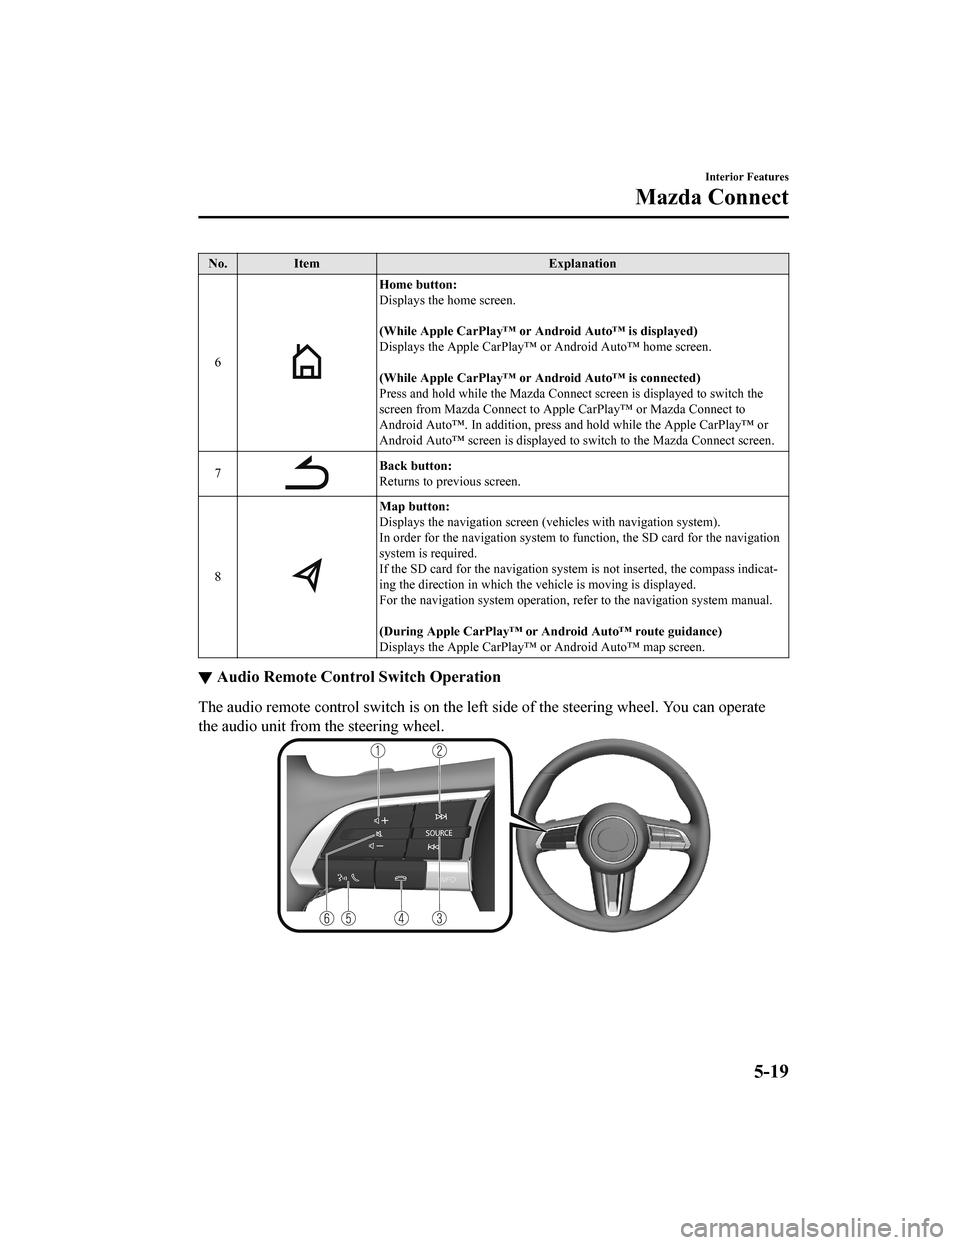 MAZDA MODEL 3 HATCHBACK 2020  Owners Manual (in English) No.Item Explanation
6
Home button:
Displays the home screen.
 
(While Apple CarPlay™ or Android Auto™ is displayed)
Displays the Apple CarPlay™ or Android Auto™ home screen.
 
(While Apple Car